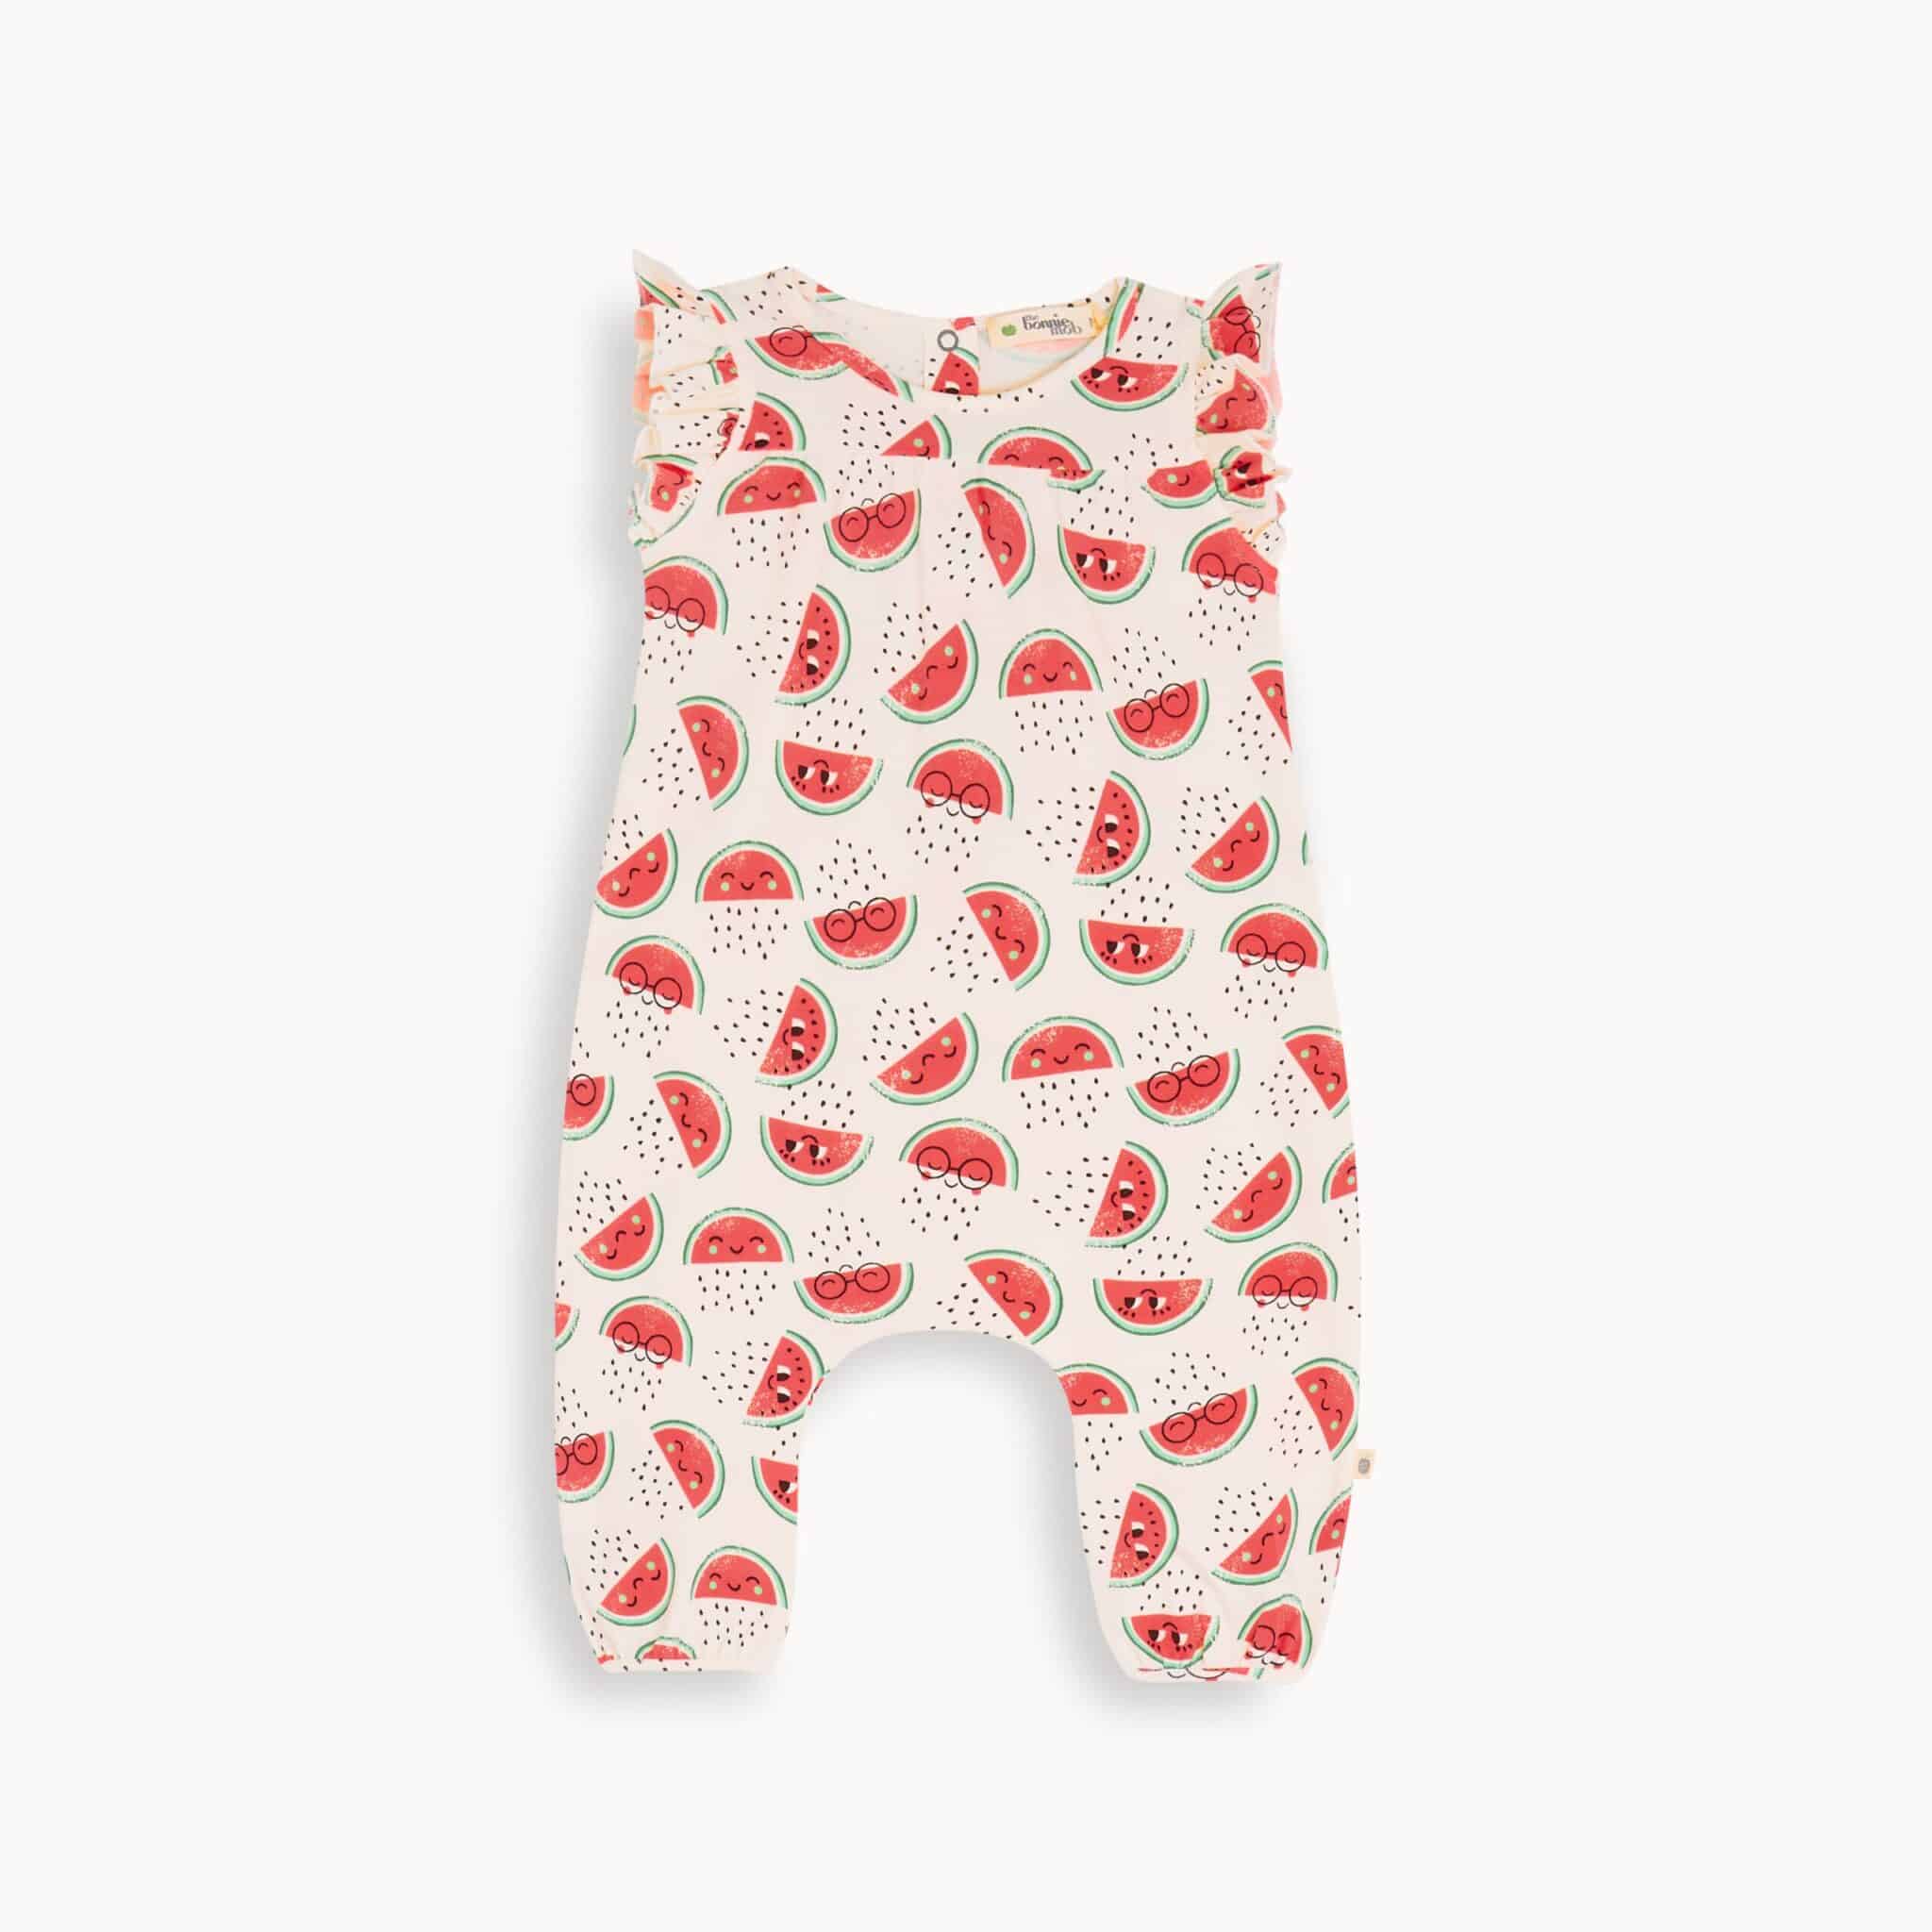 The Bonnie mob watermelon summer baby outfit